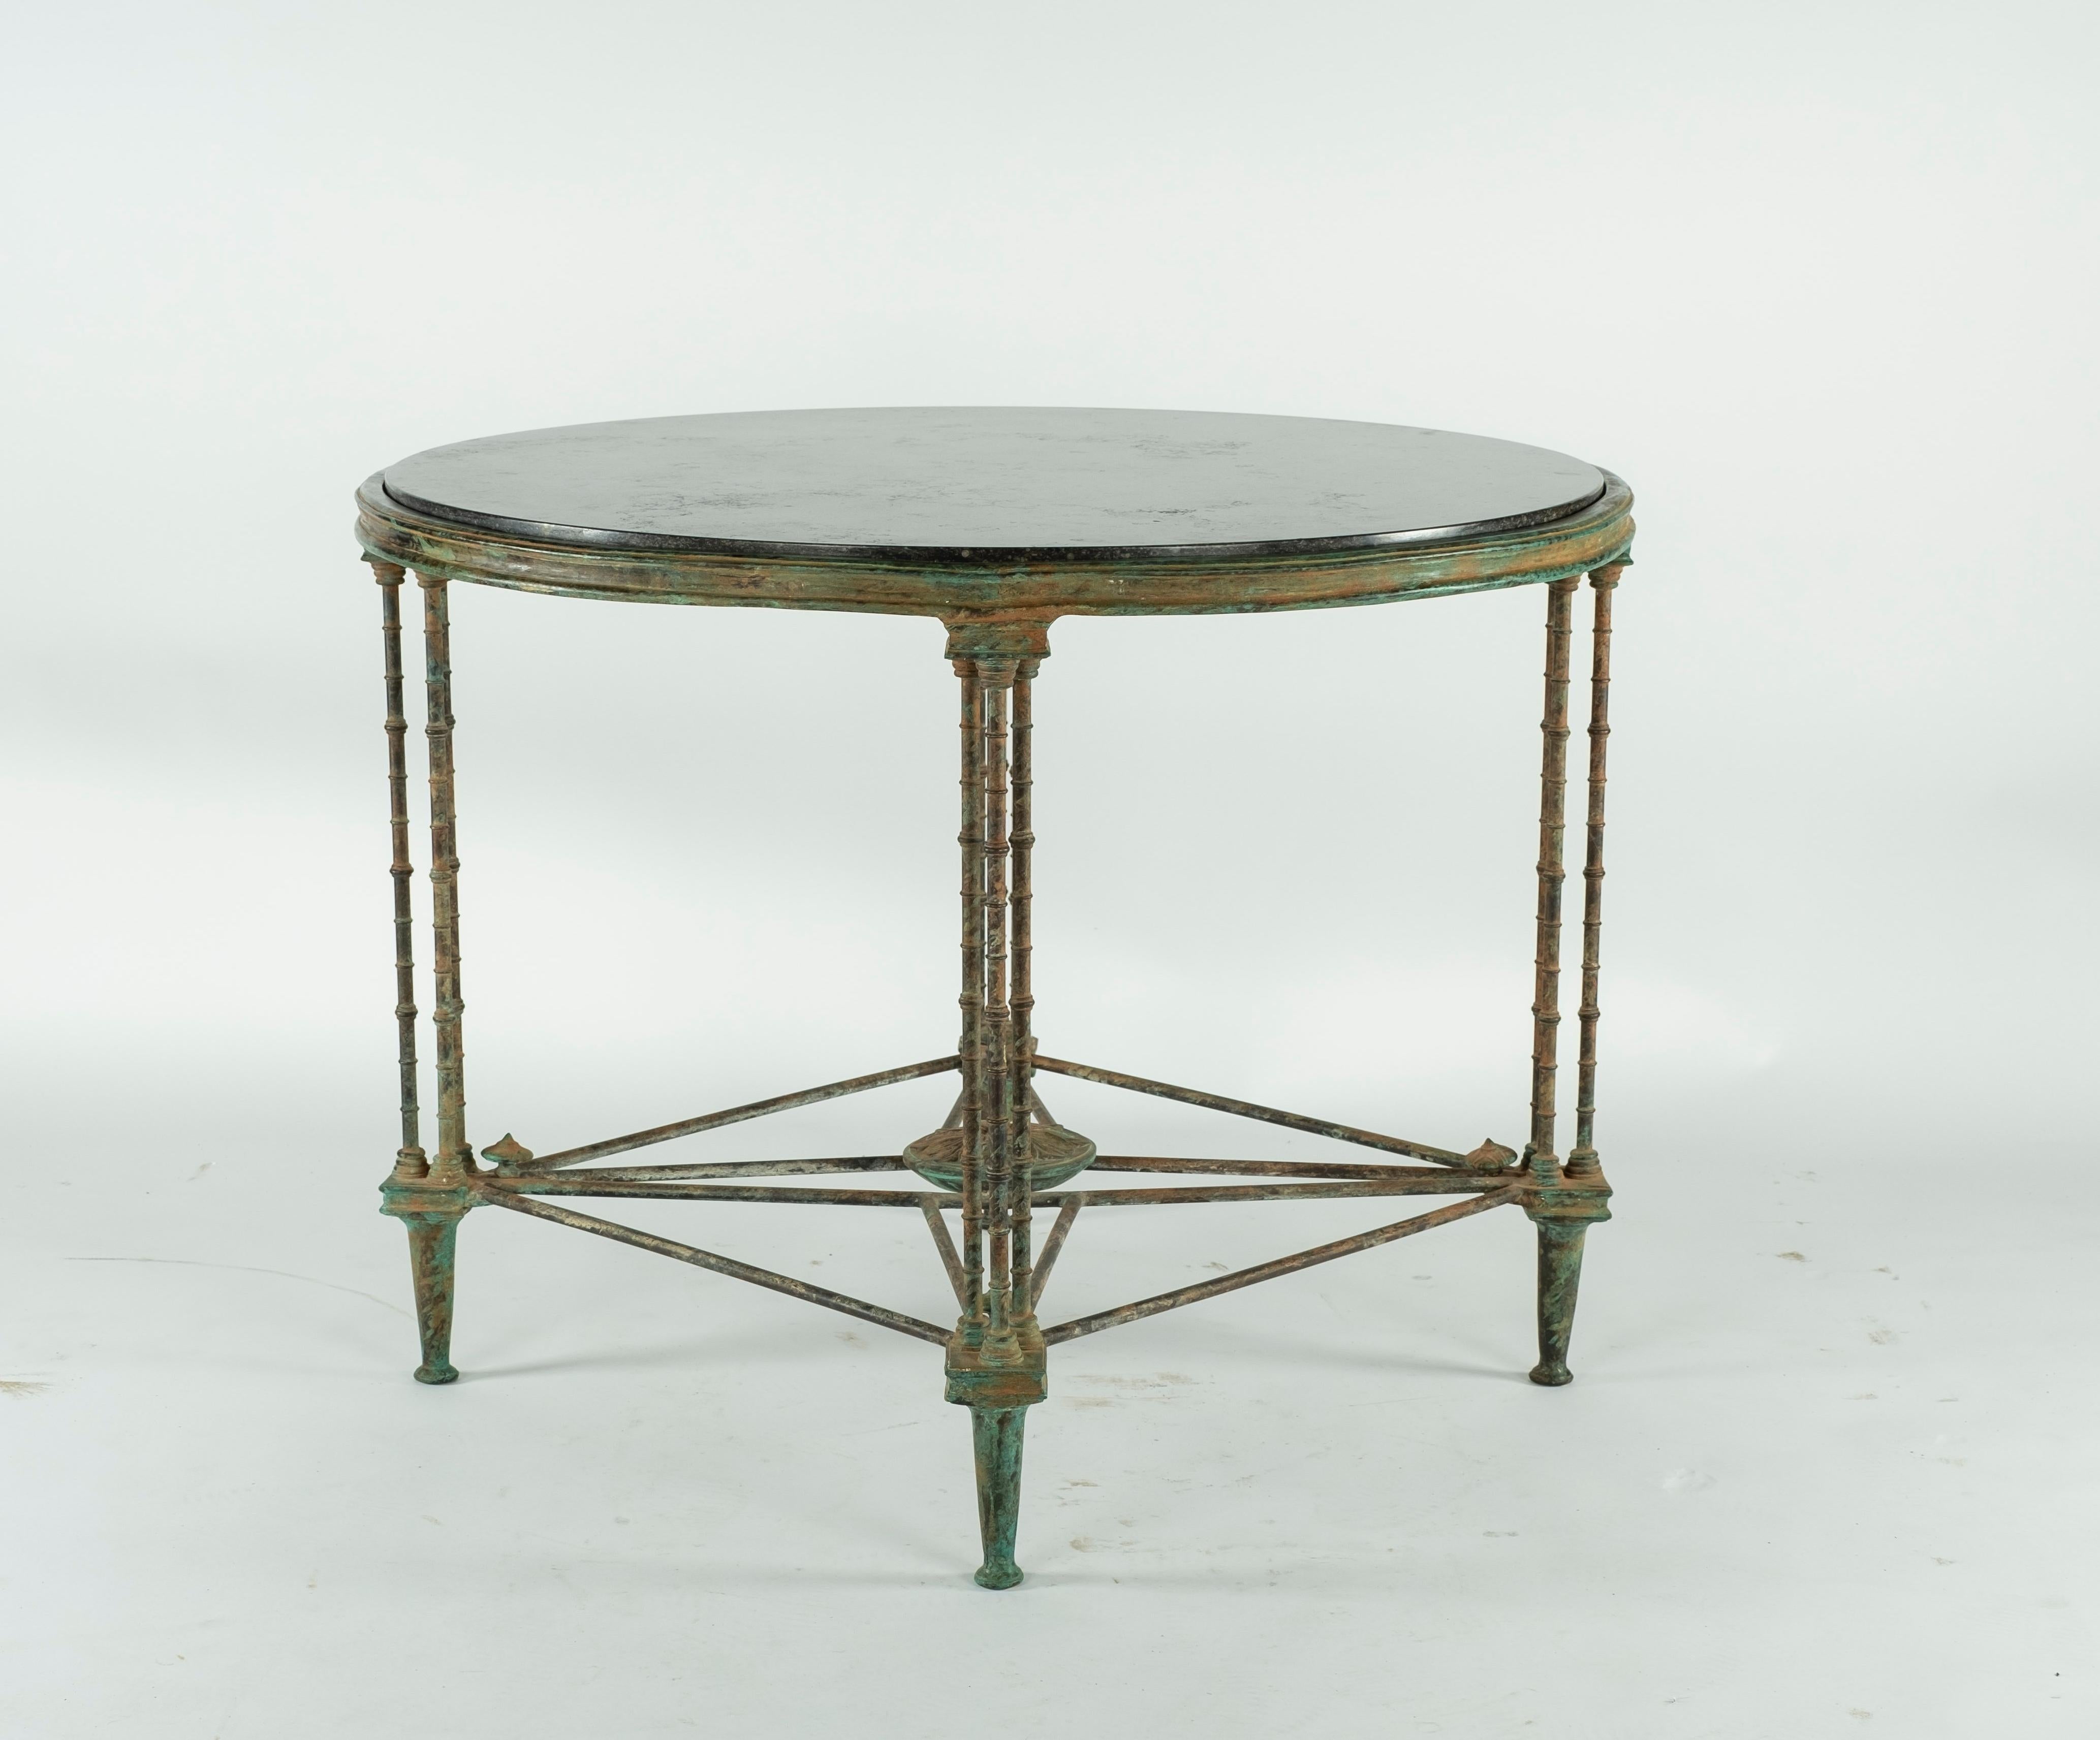 Intricate cast bronze table base with four legs and a black stone marble top. Beautiful patina on the bronze.